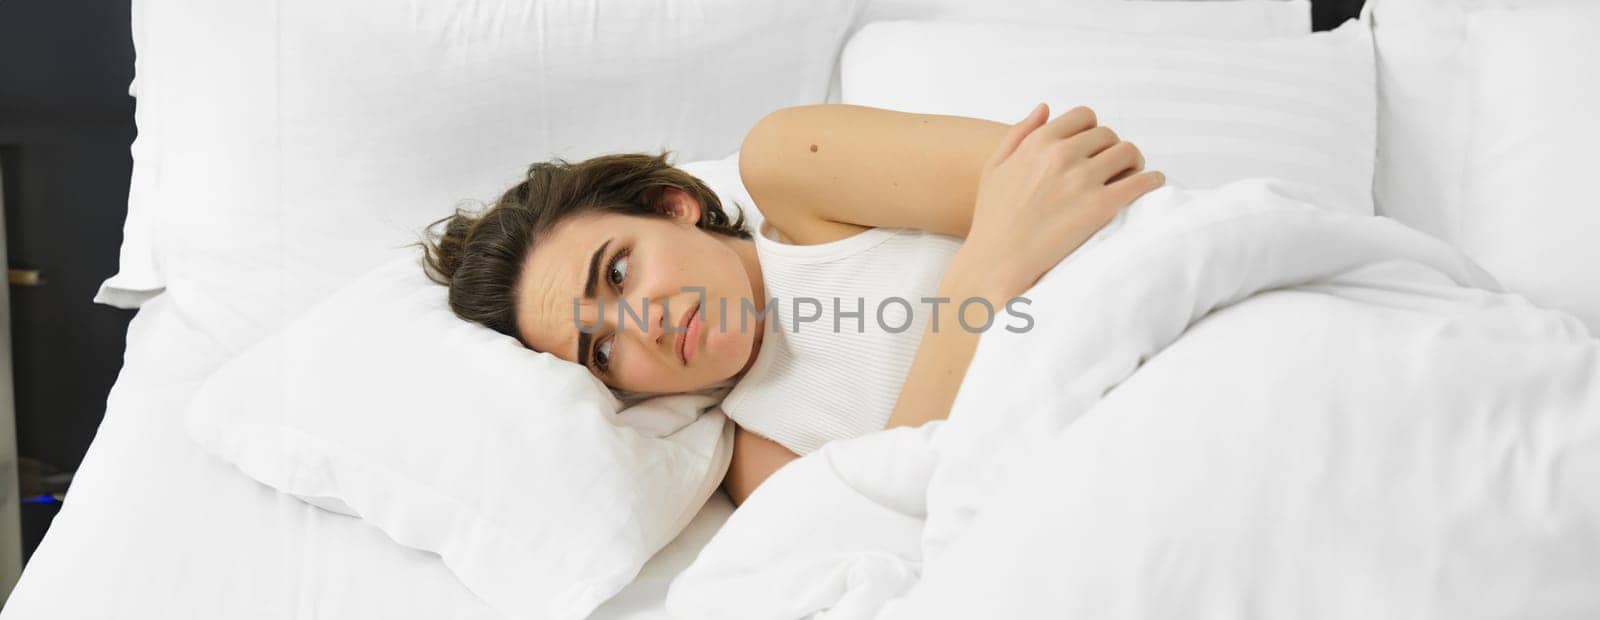 Portrait of woman feeling unwell, lying in bed with menstrual pain, stomach ache, frowning and looking sad. Copy space